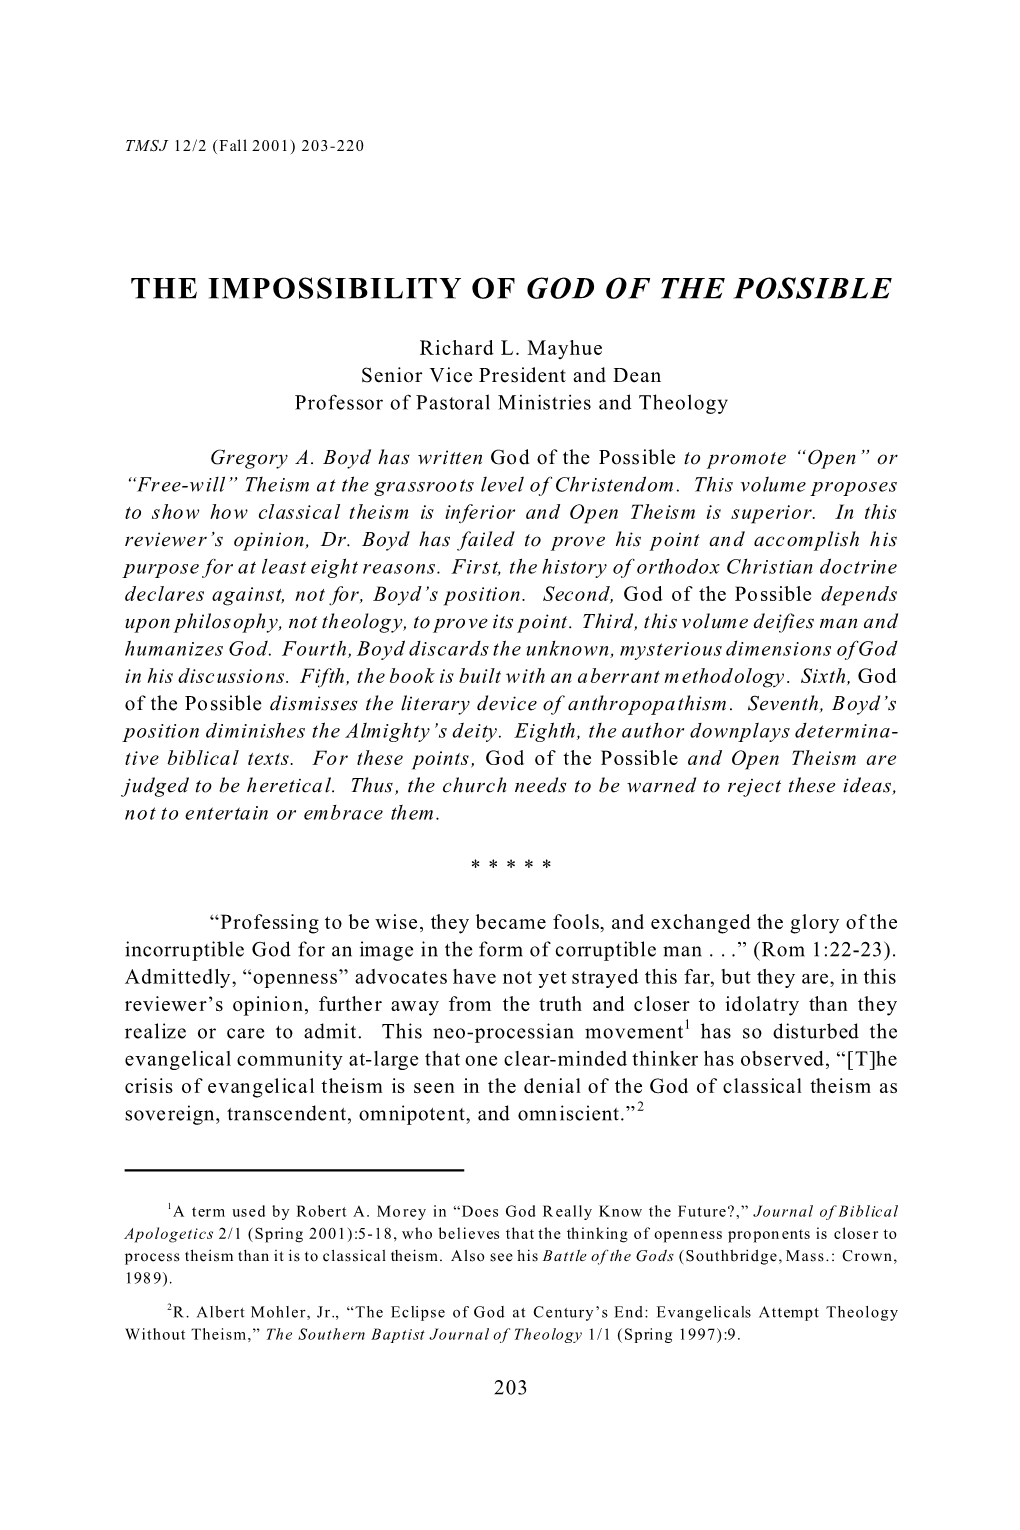 The Impossibility of God of the Possible